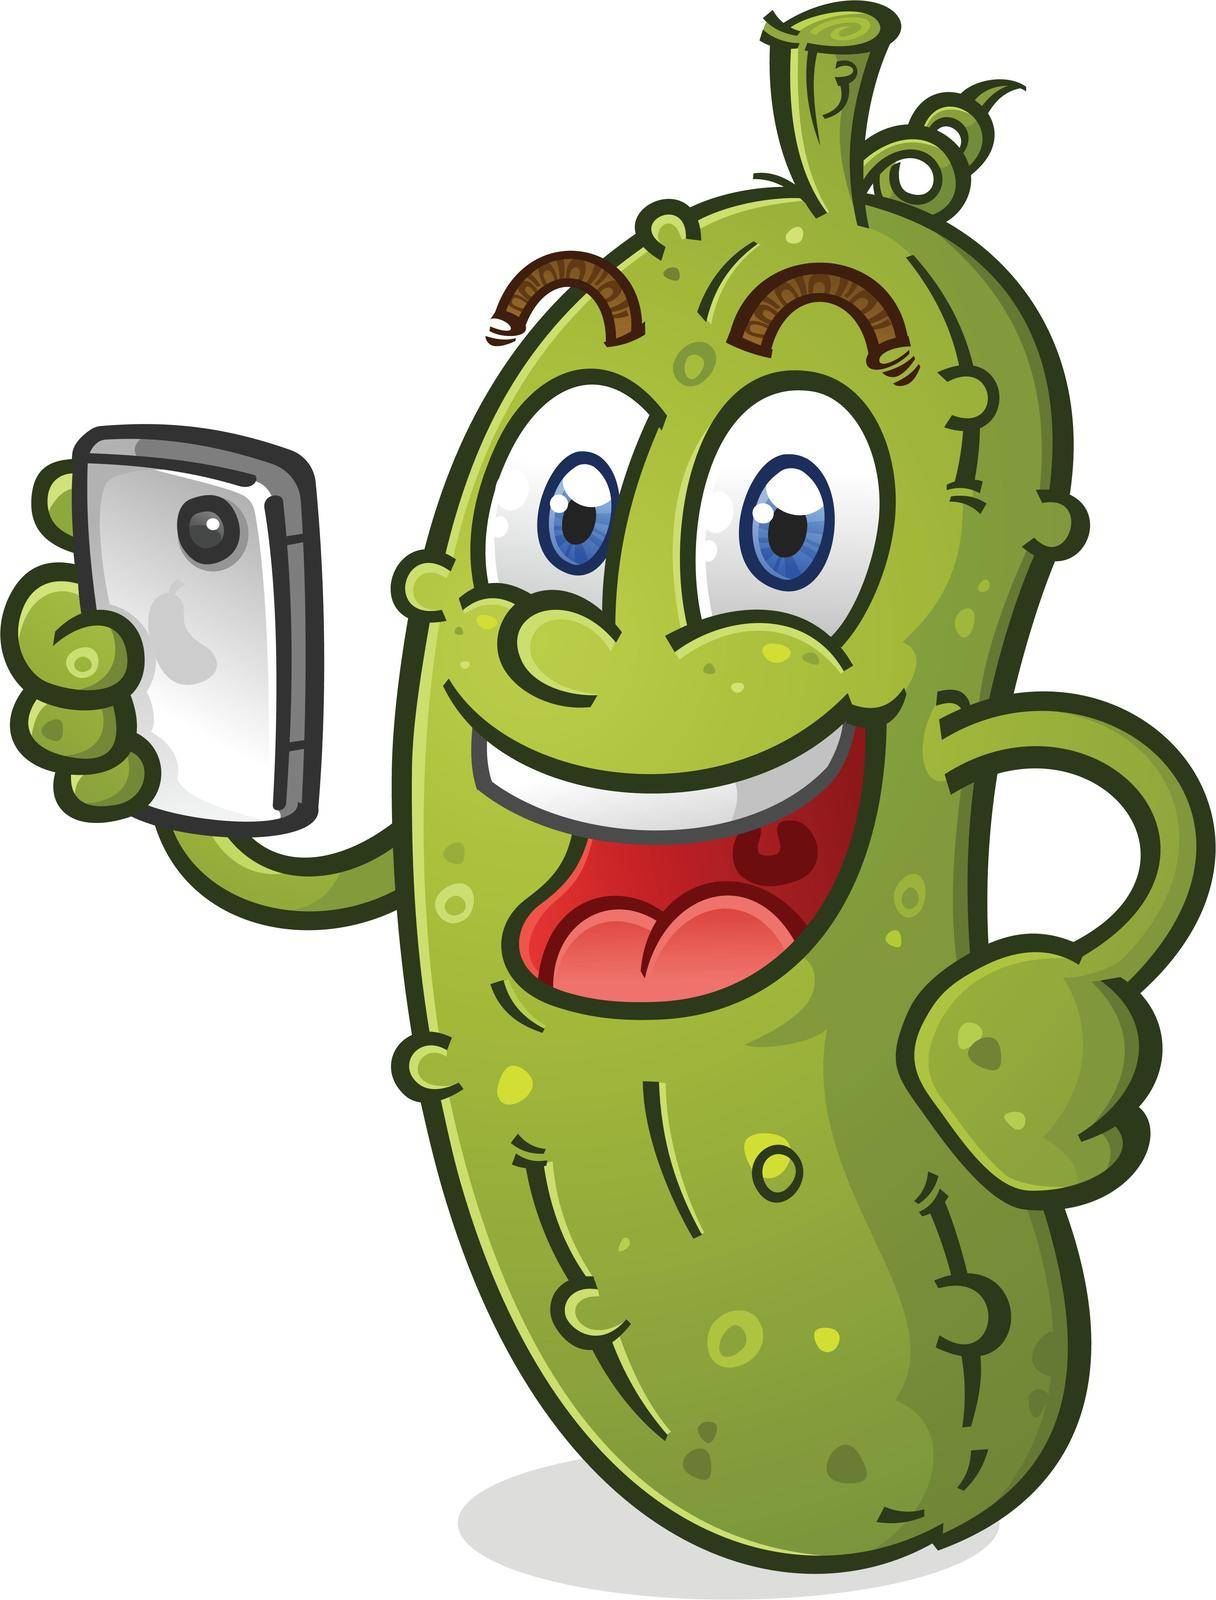 A smiling happy pickle using it's mobile phone to shop online, take photos and browse the internet